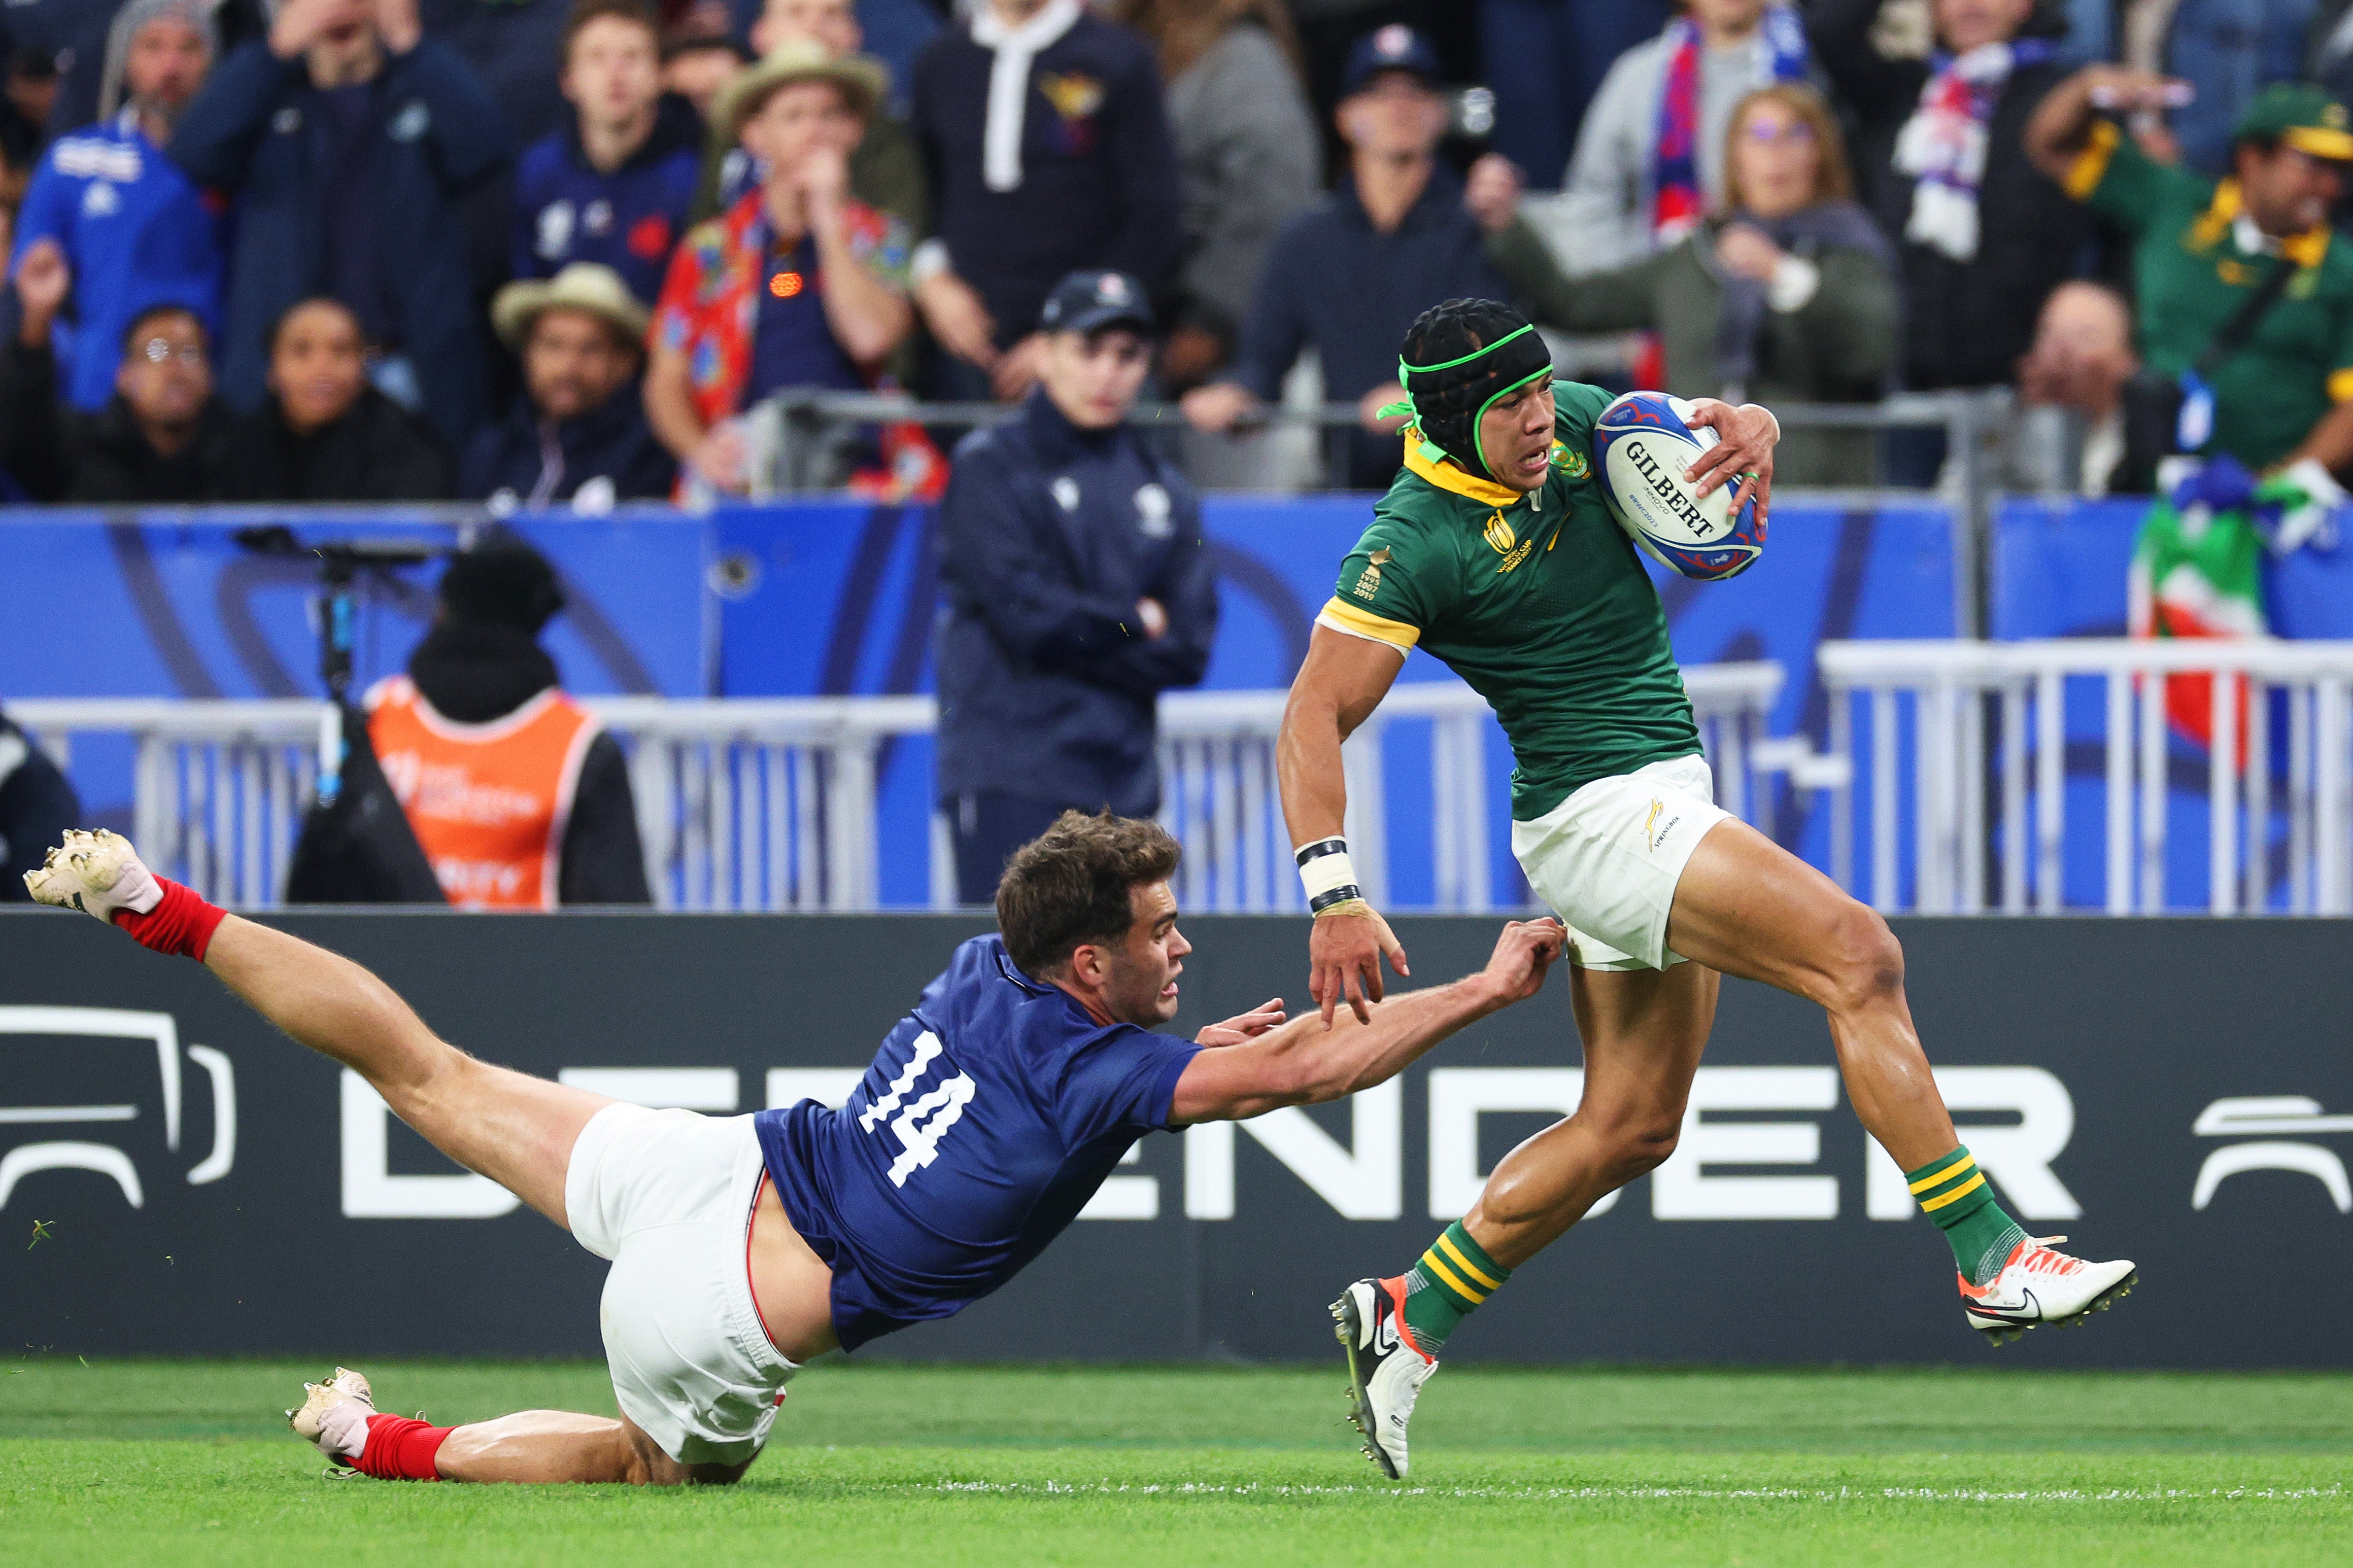 Cheslin Kolbe scored a try in a mesmerising first half